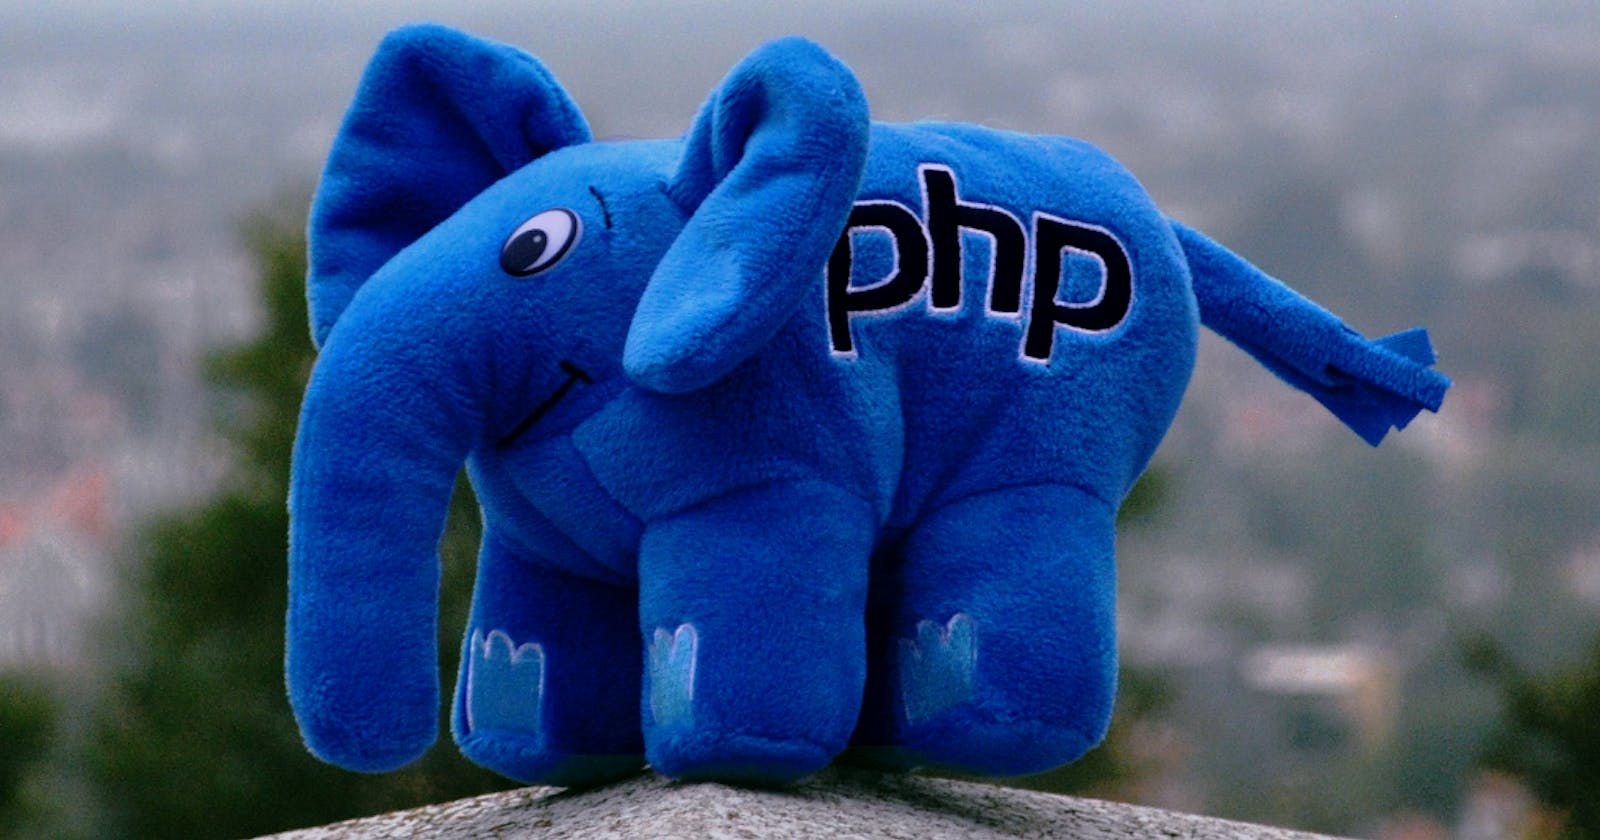 PHP is not a programming language